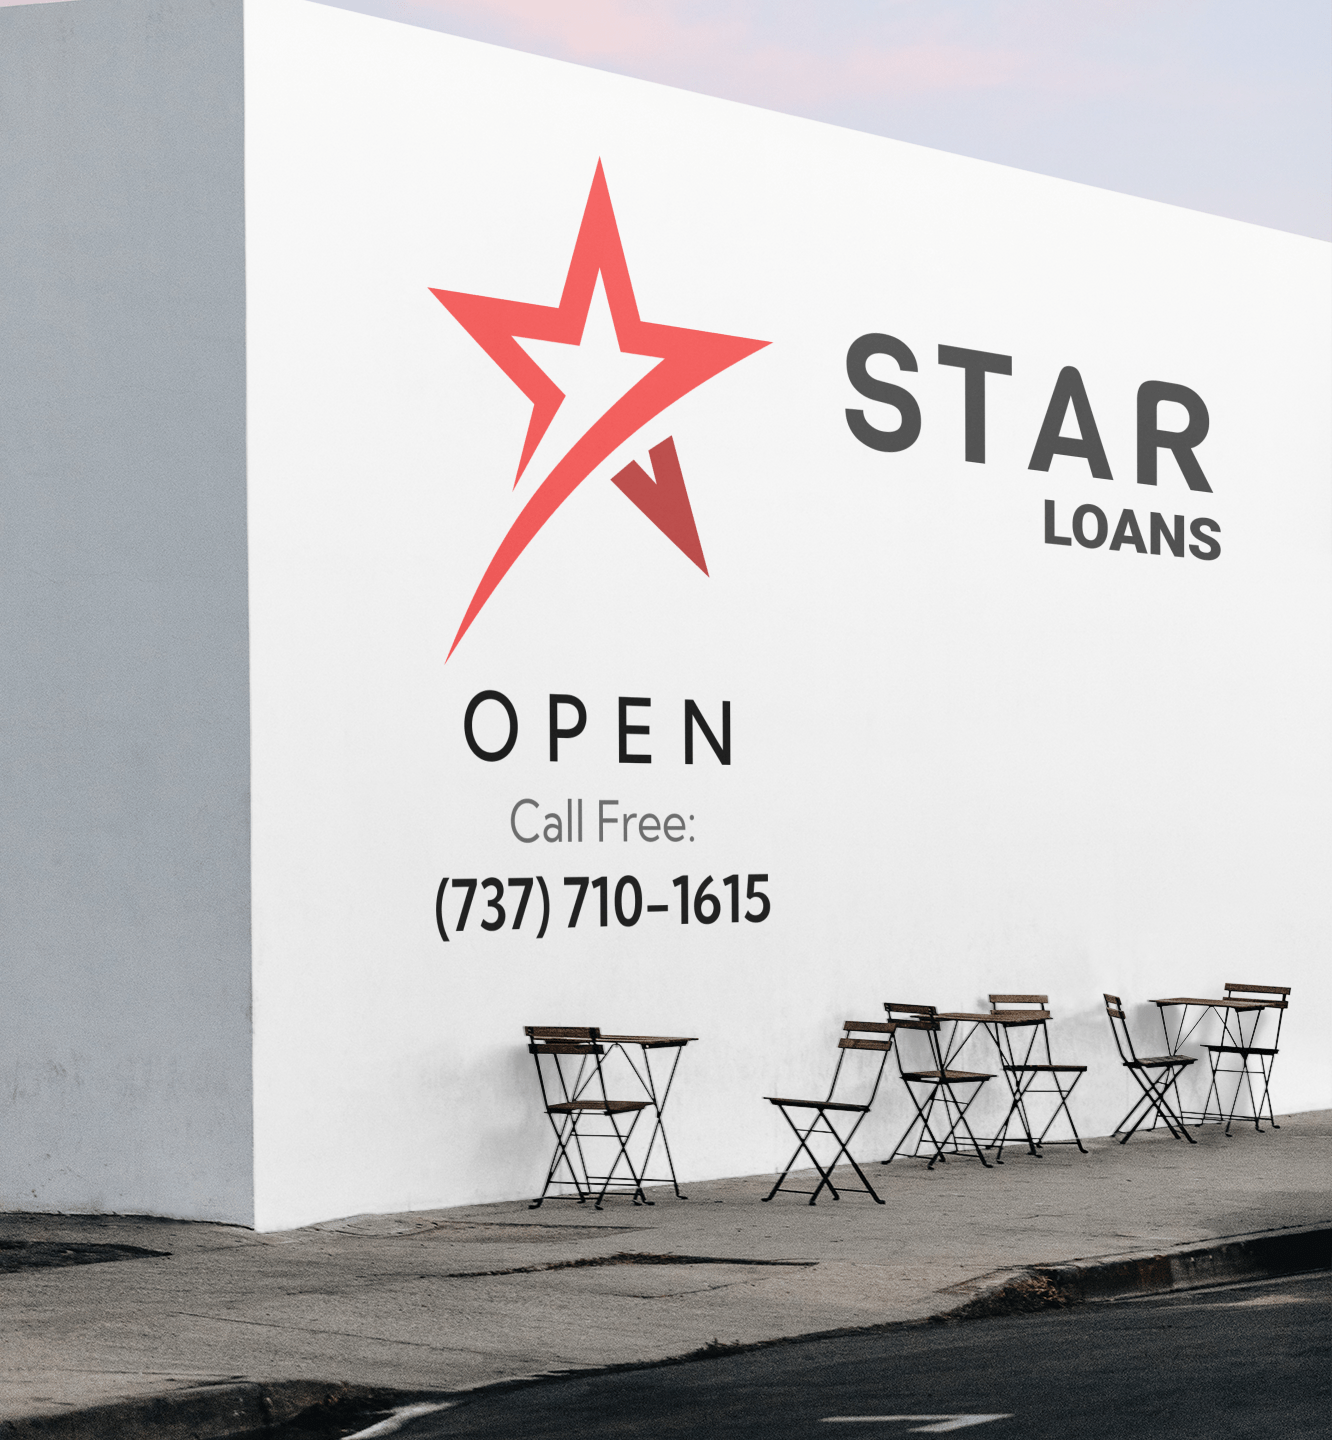 Need a Loan & Been Refused Everywhere StarLoans Knows What to Do